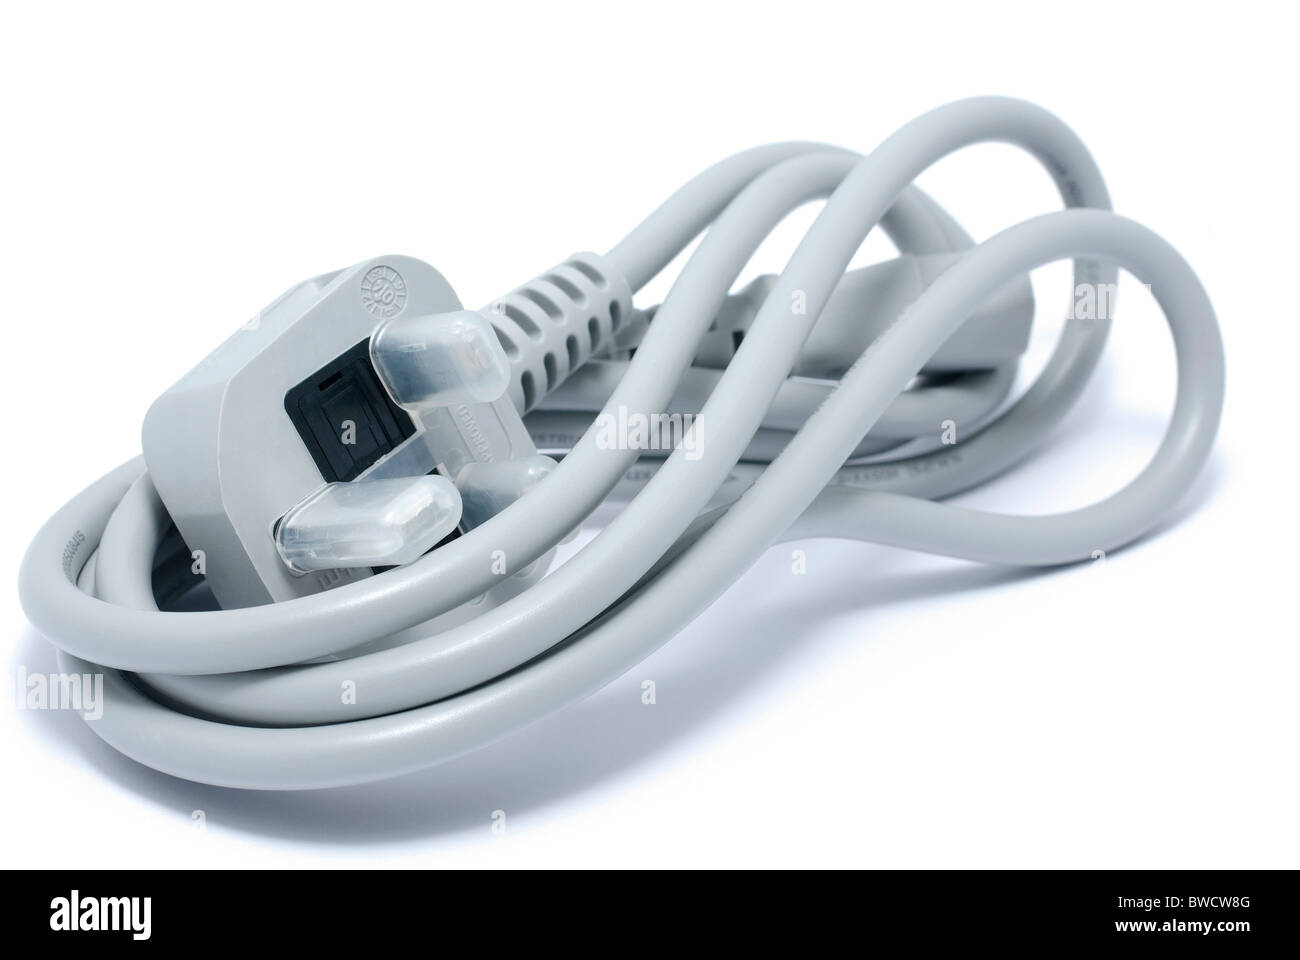 Unused gray power cable for computer. Isolated on white background with shadow. Stock Photo